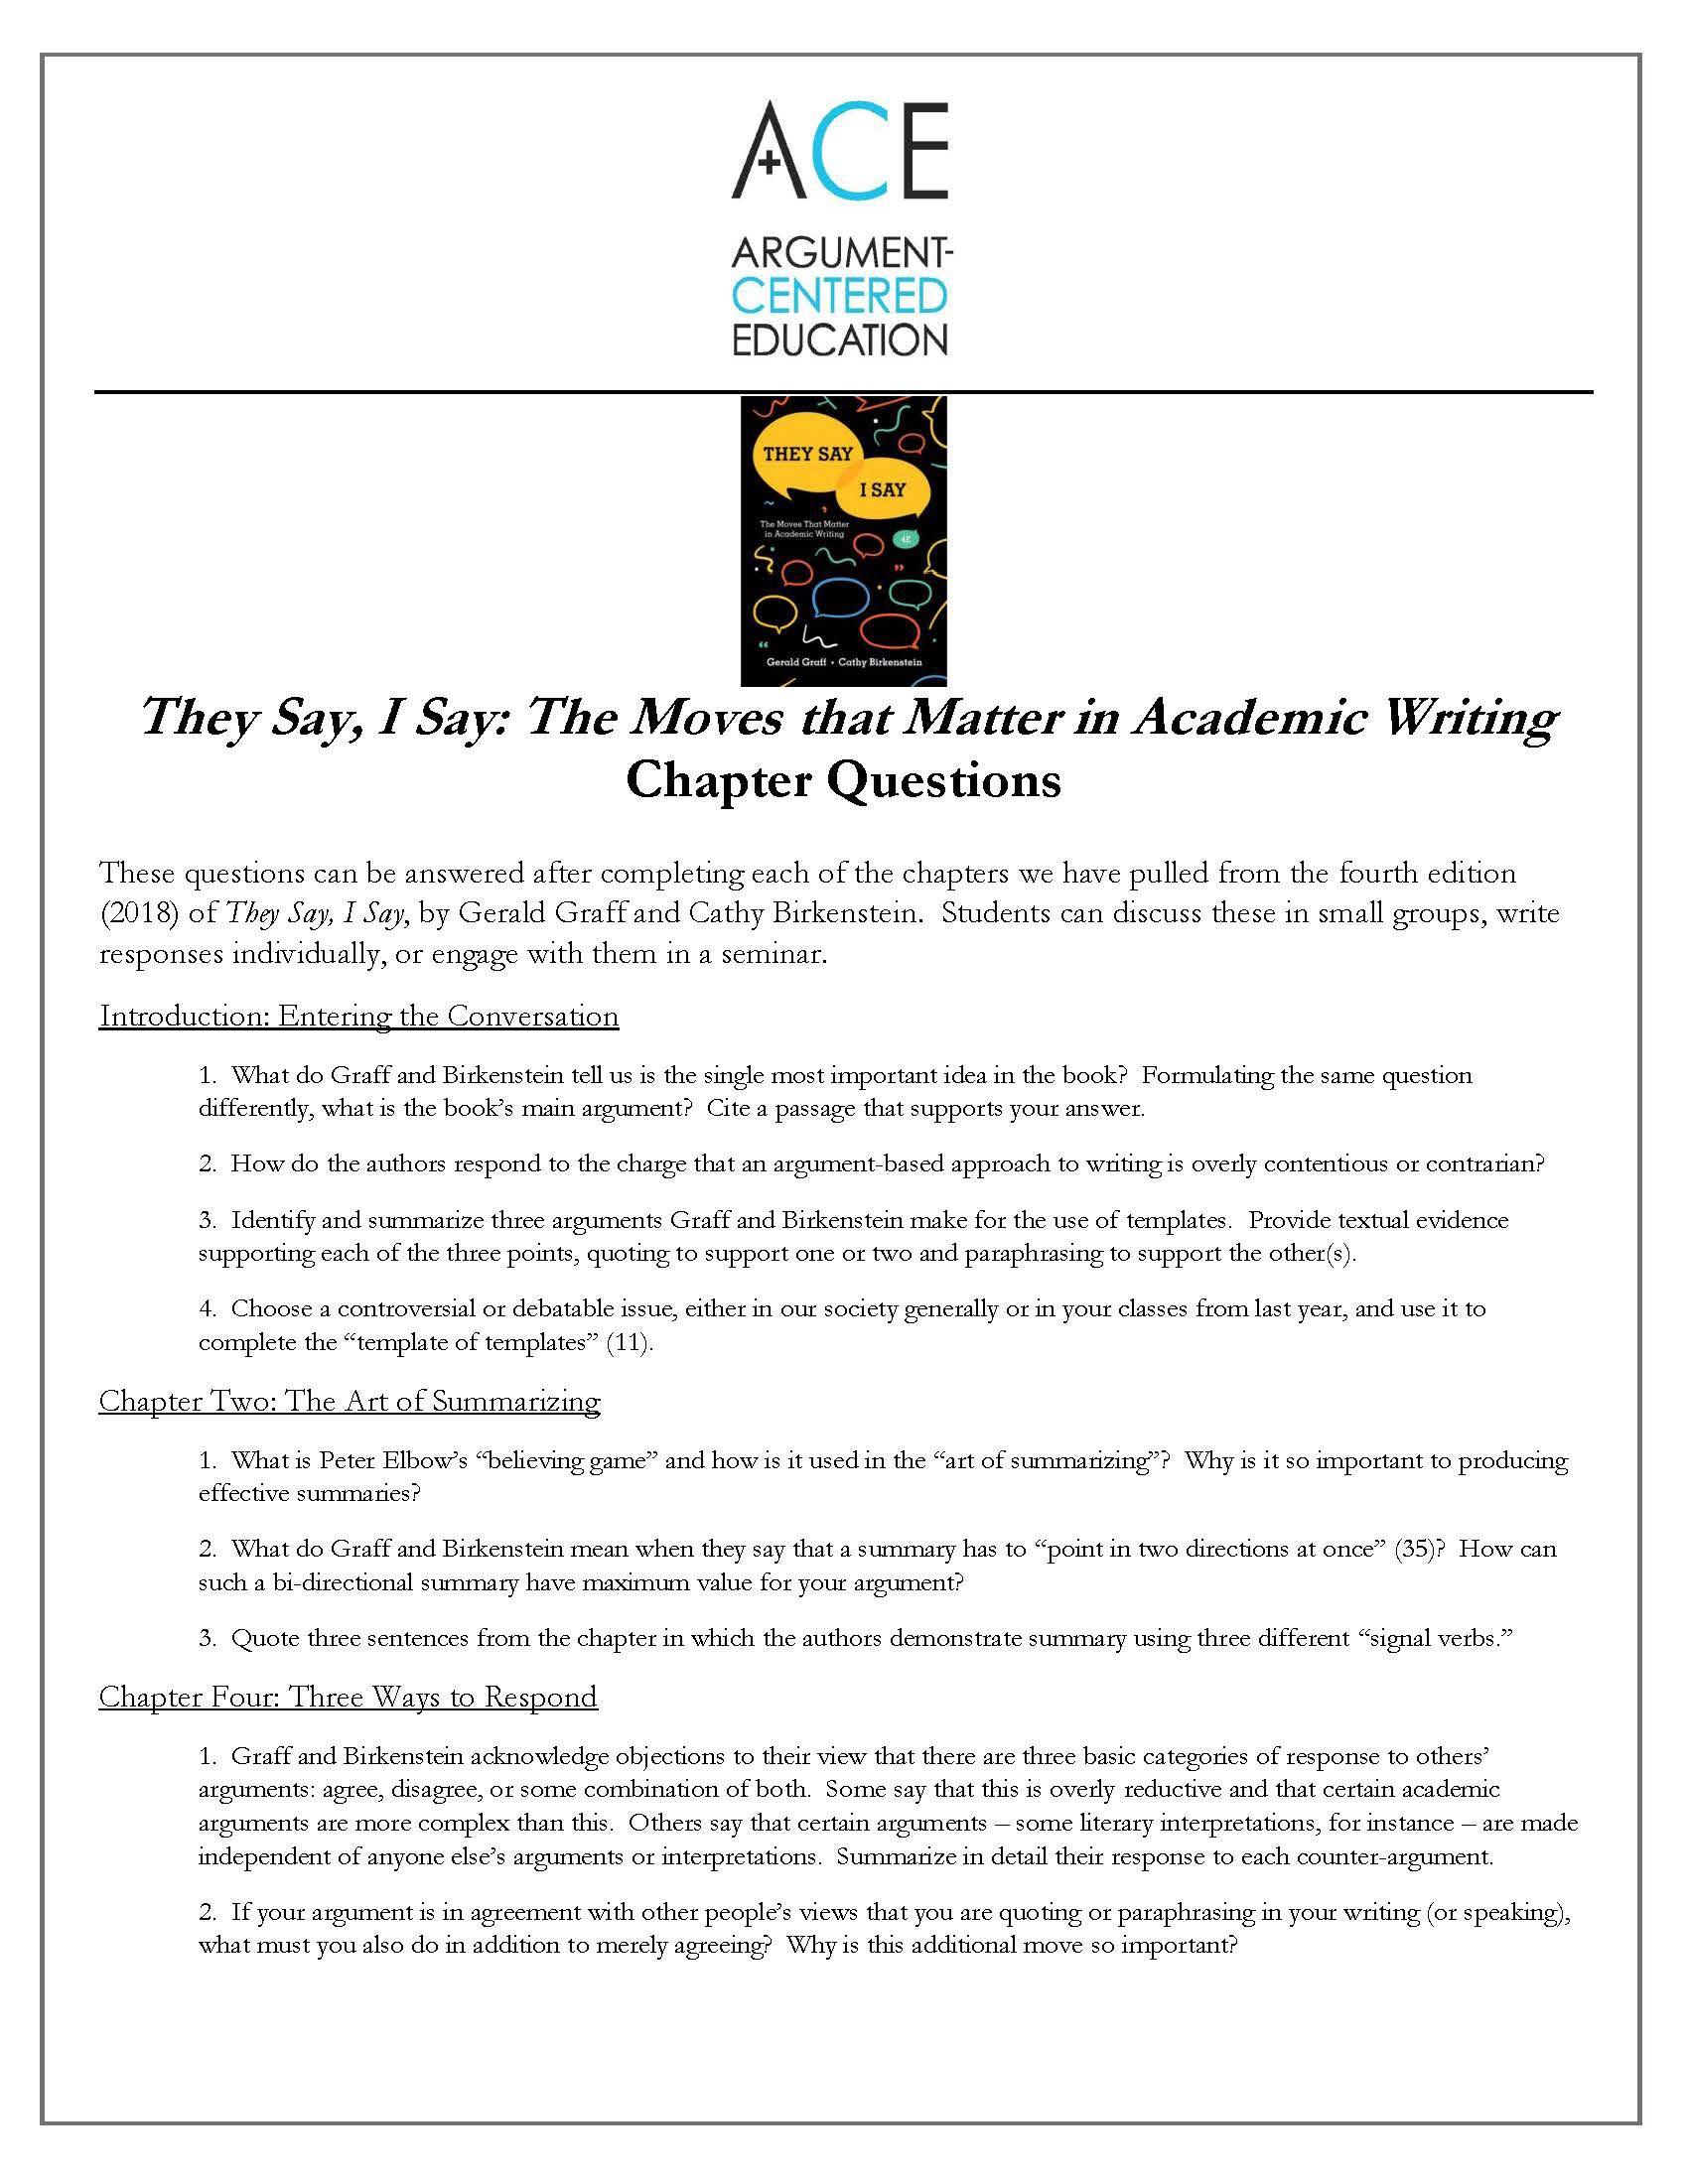 Chapter Questions on the New Edition of ‘They Say, I Say’ | Argument